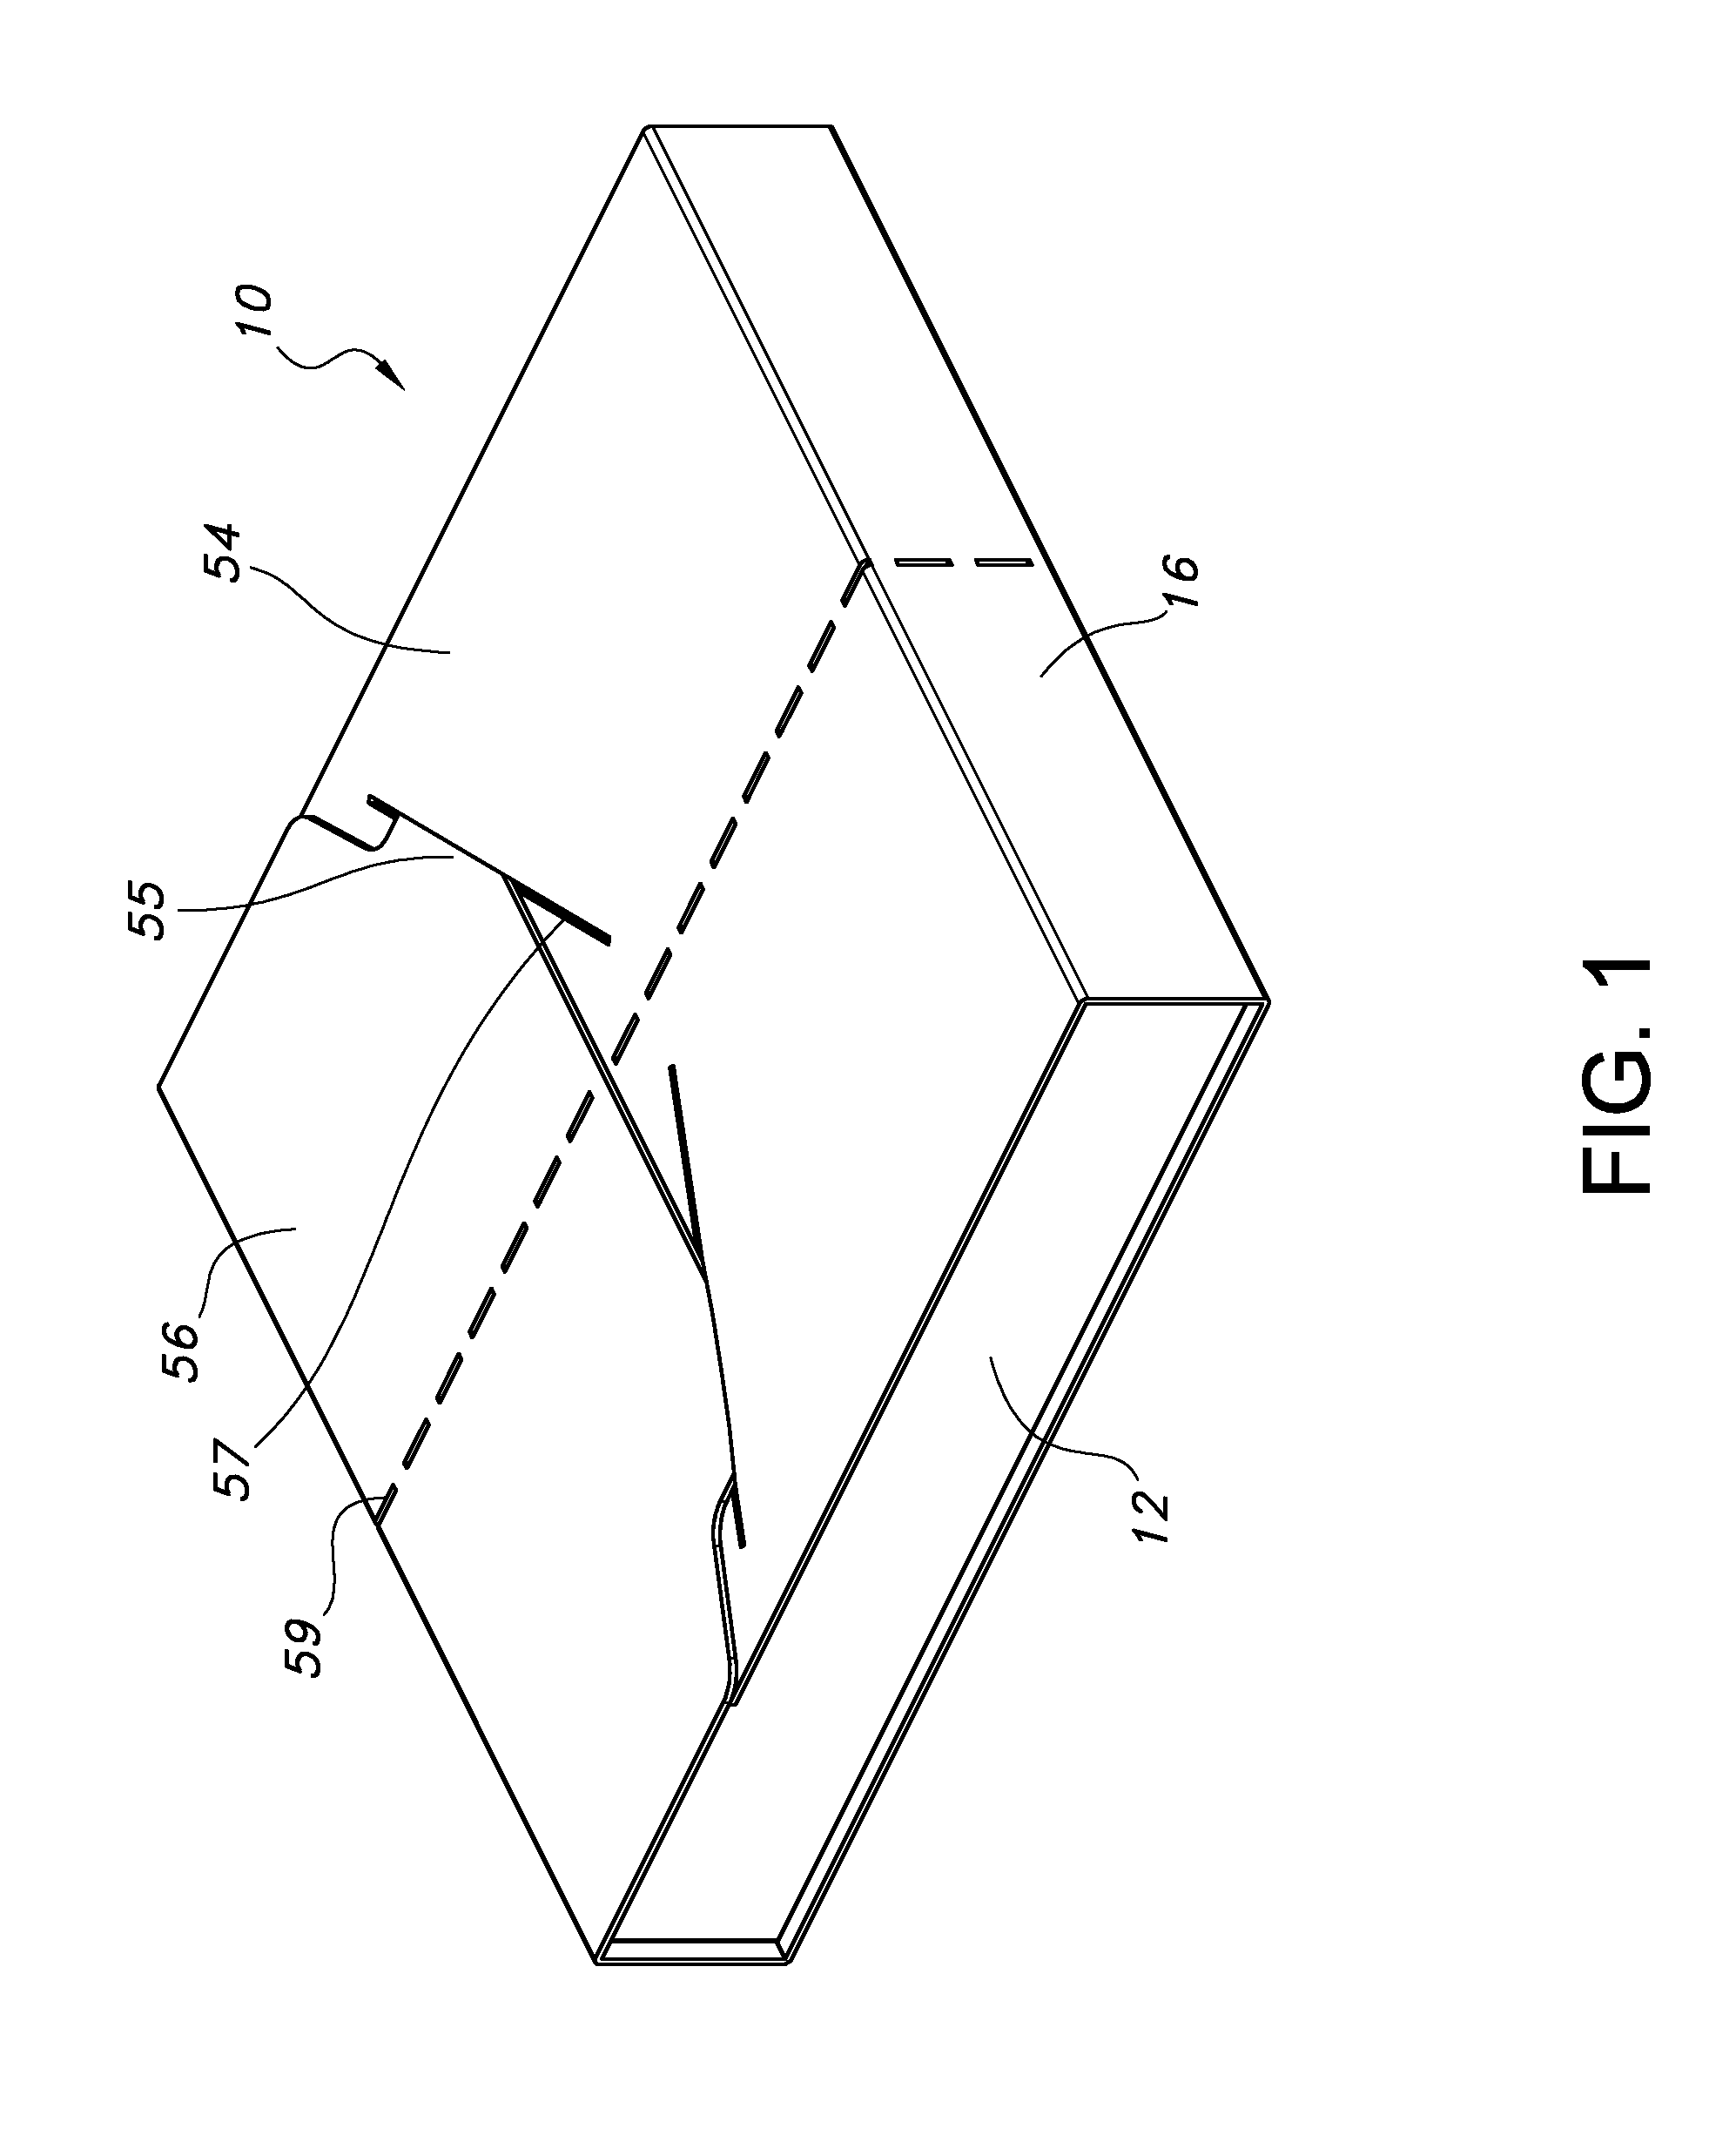 Package assembly for supporting a pair of consumable product packets